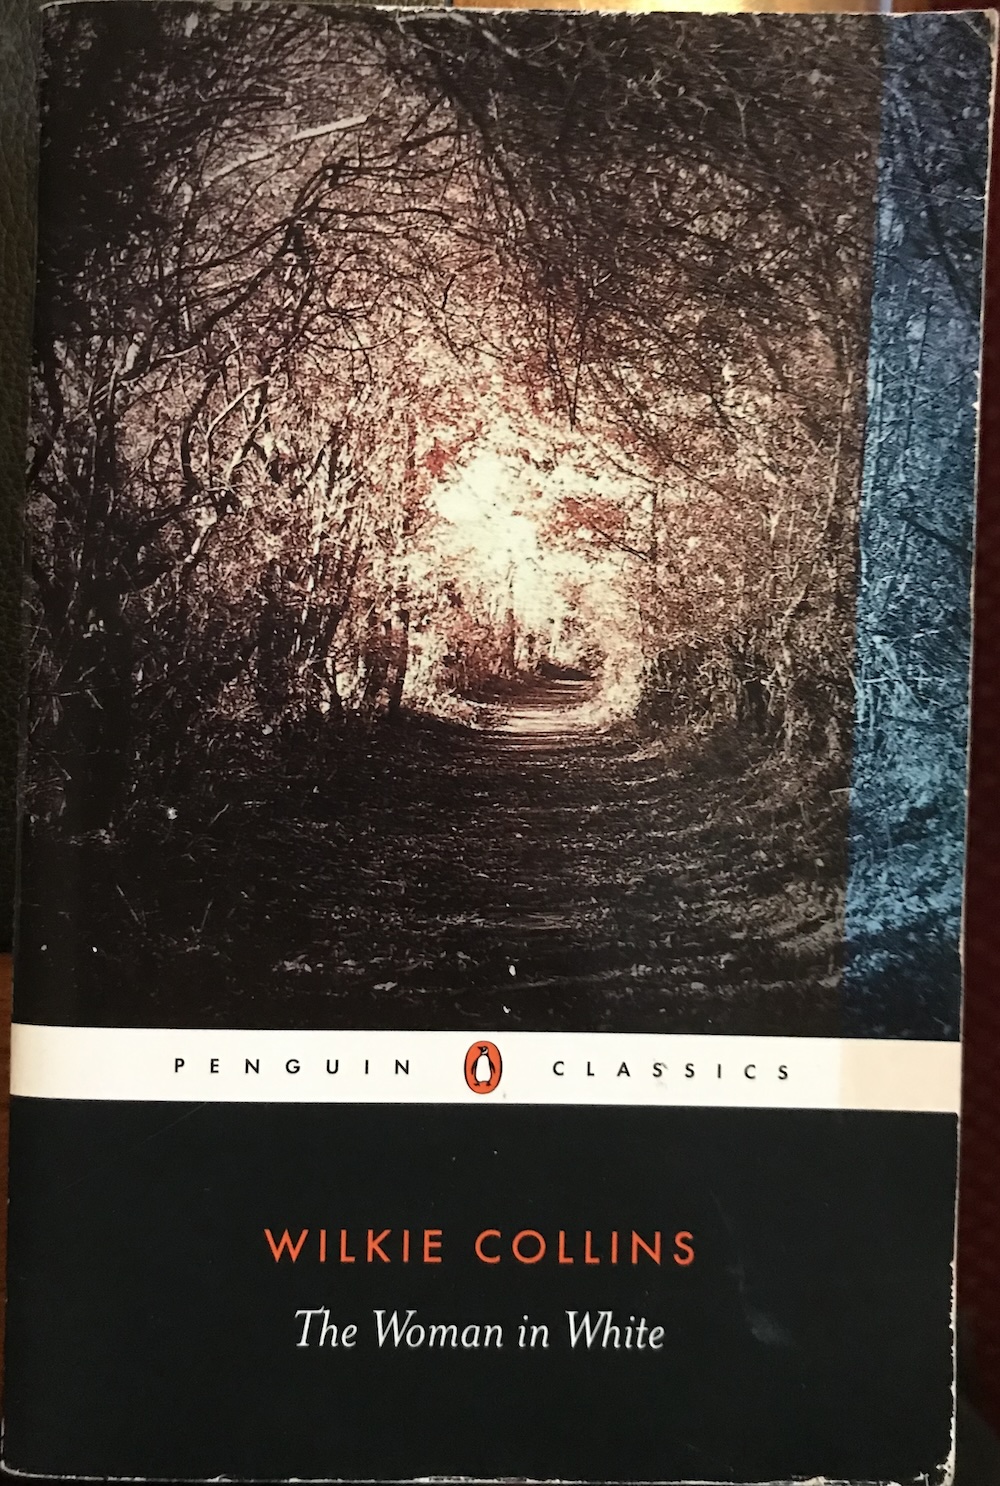 The Woman in White Wilkie Collins